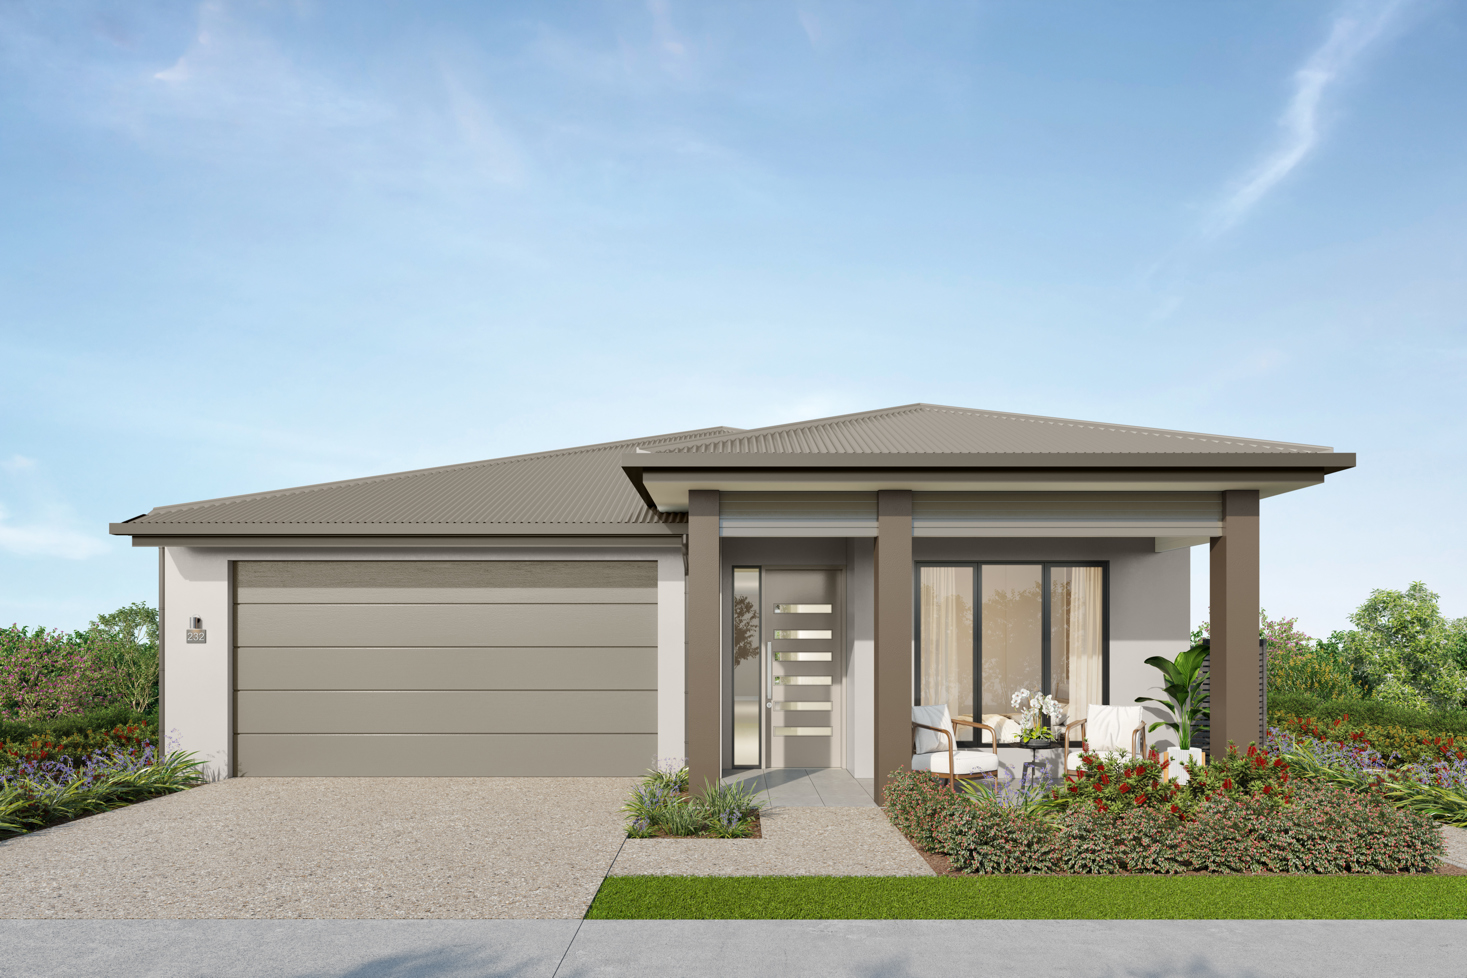 Facade render of the Yarra H3 house design with a hip roofline in country colour scheme, located at Stockland Halcyon Gables in The Hills district.